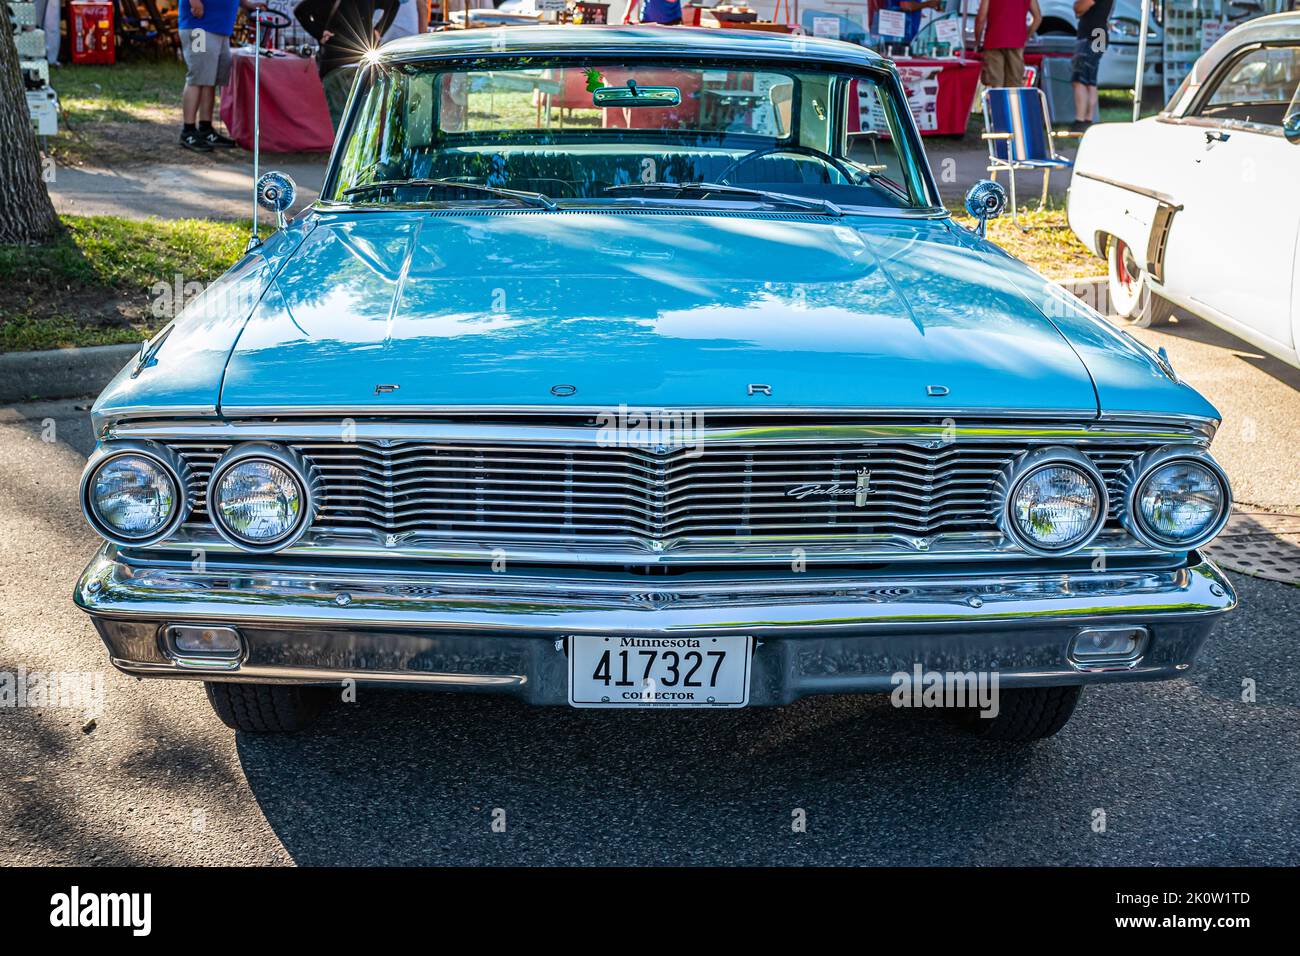 Falcon Heights, MN - June 18, 2022: High perspective front view of a 1964 Ford Galaxie 500 2 Door Hardtop at a local car show. Stock Photo